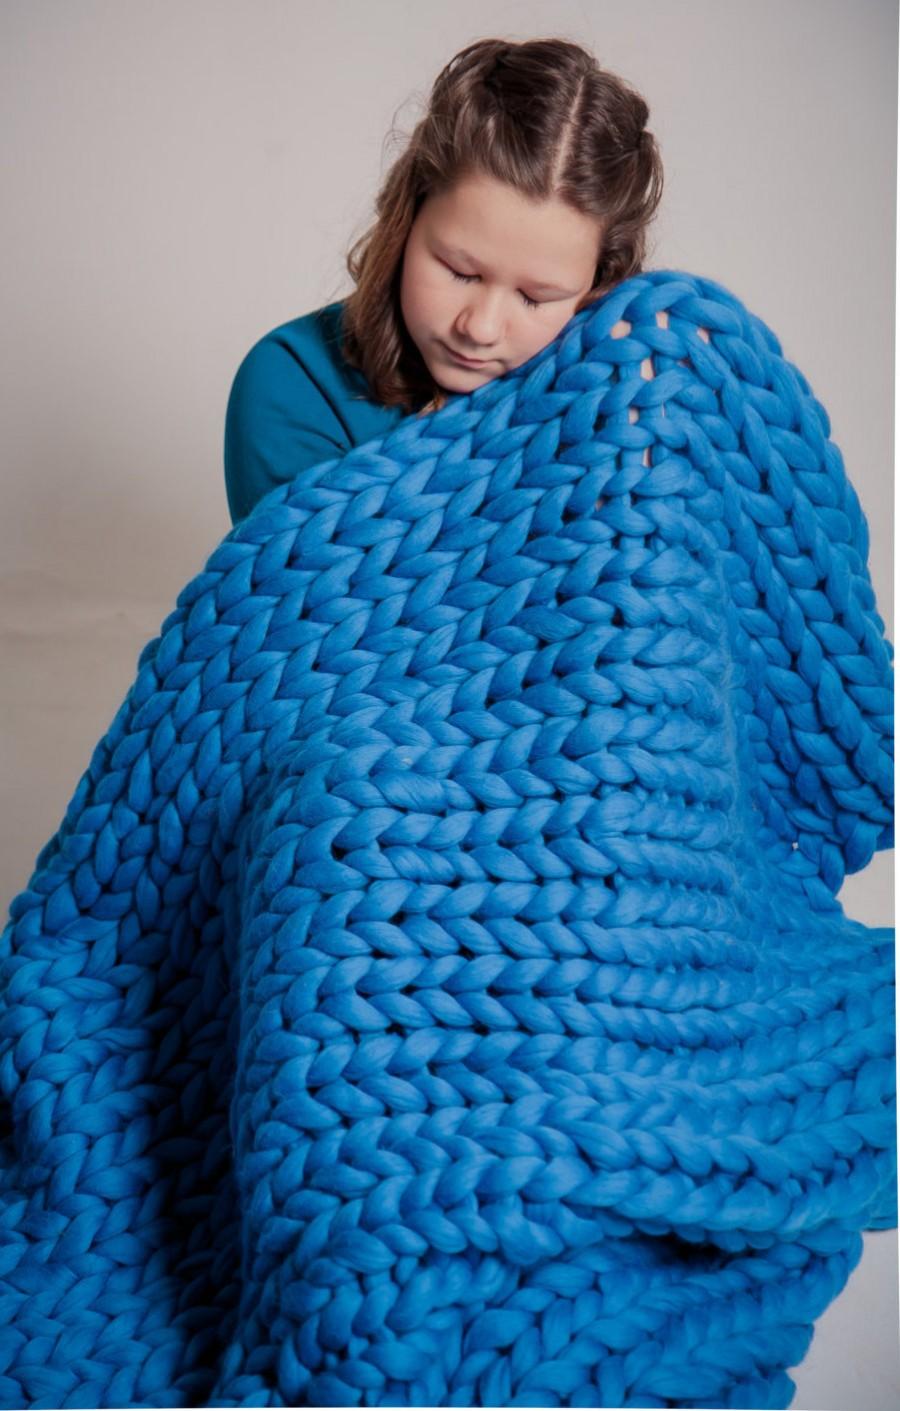 Wedding - Chunky blanket throw, Giant knitted afghan blanket, Pure Wool Giant Blanket, Bulky Knit Throw, Chunky Knitting, Lap blanket. Gift, Blue